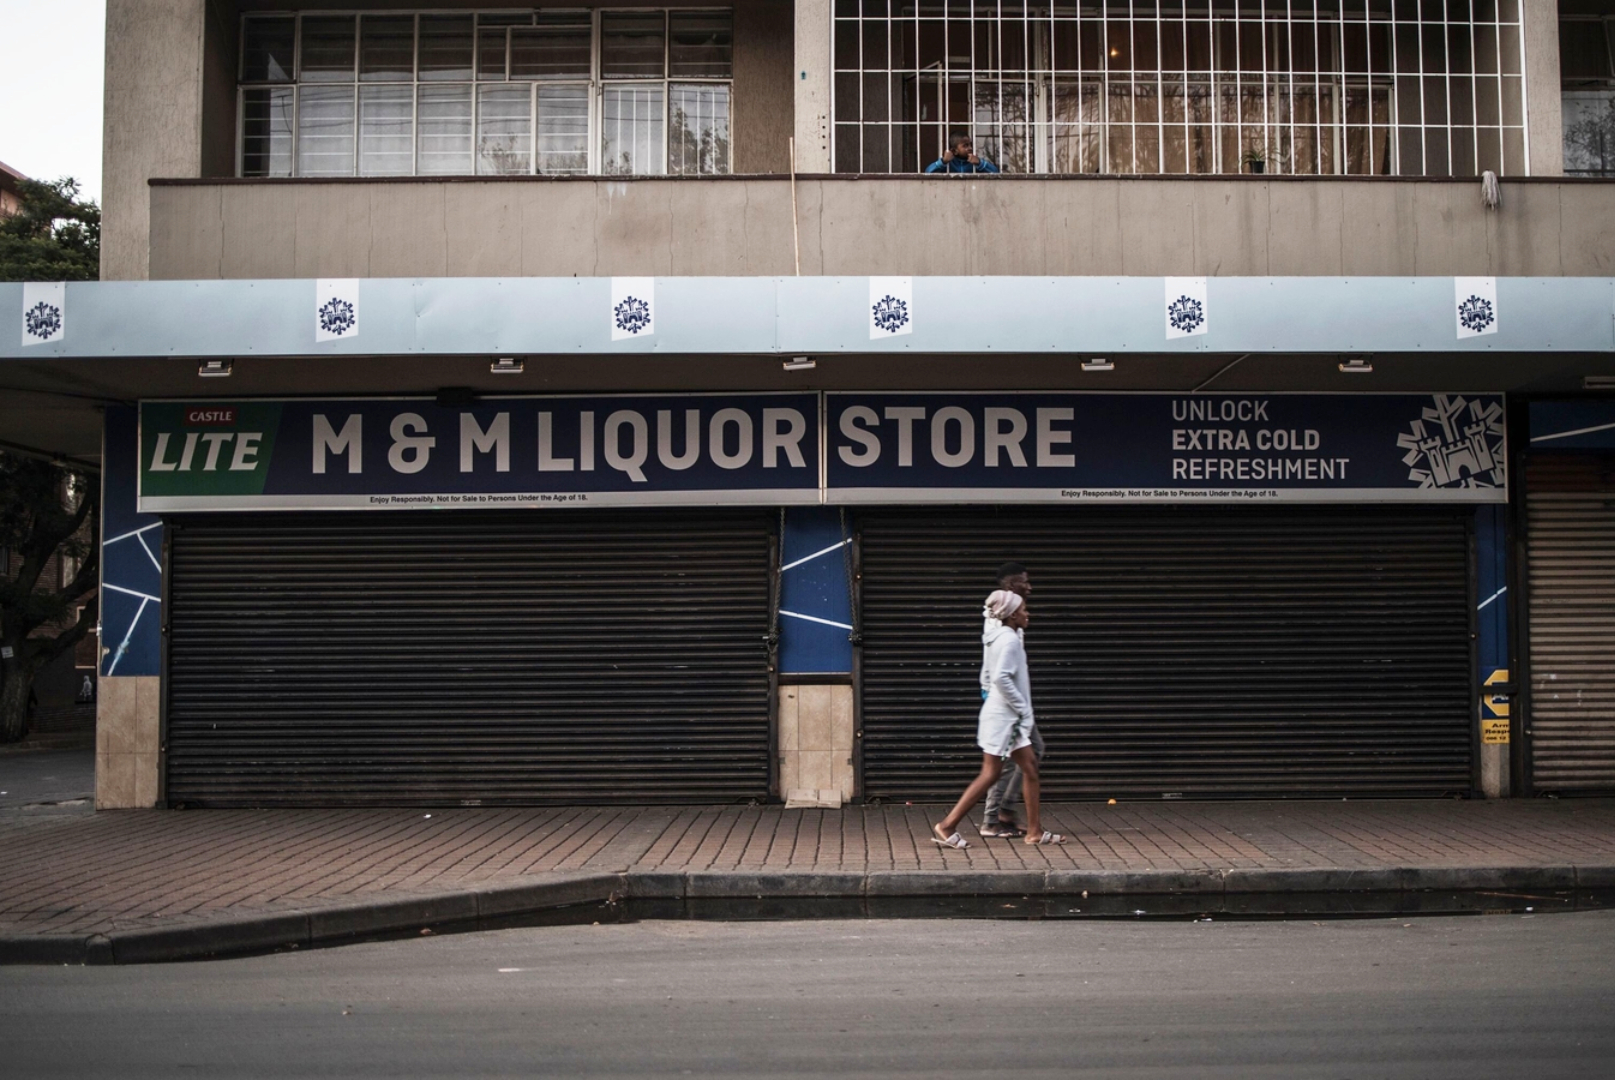 South Africa Bans Alcohol Sales Requires Masks As Virus Spikes